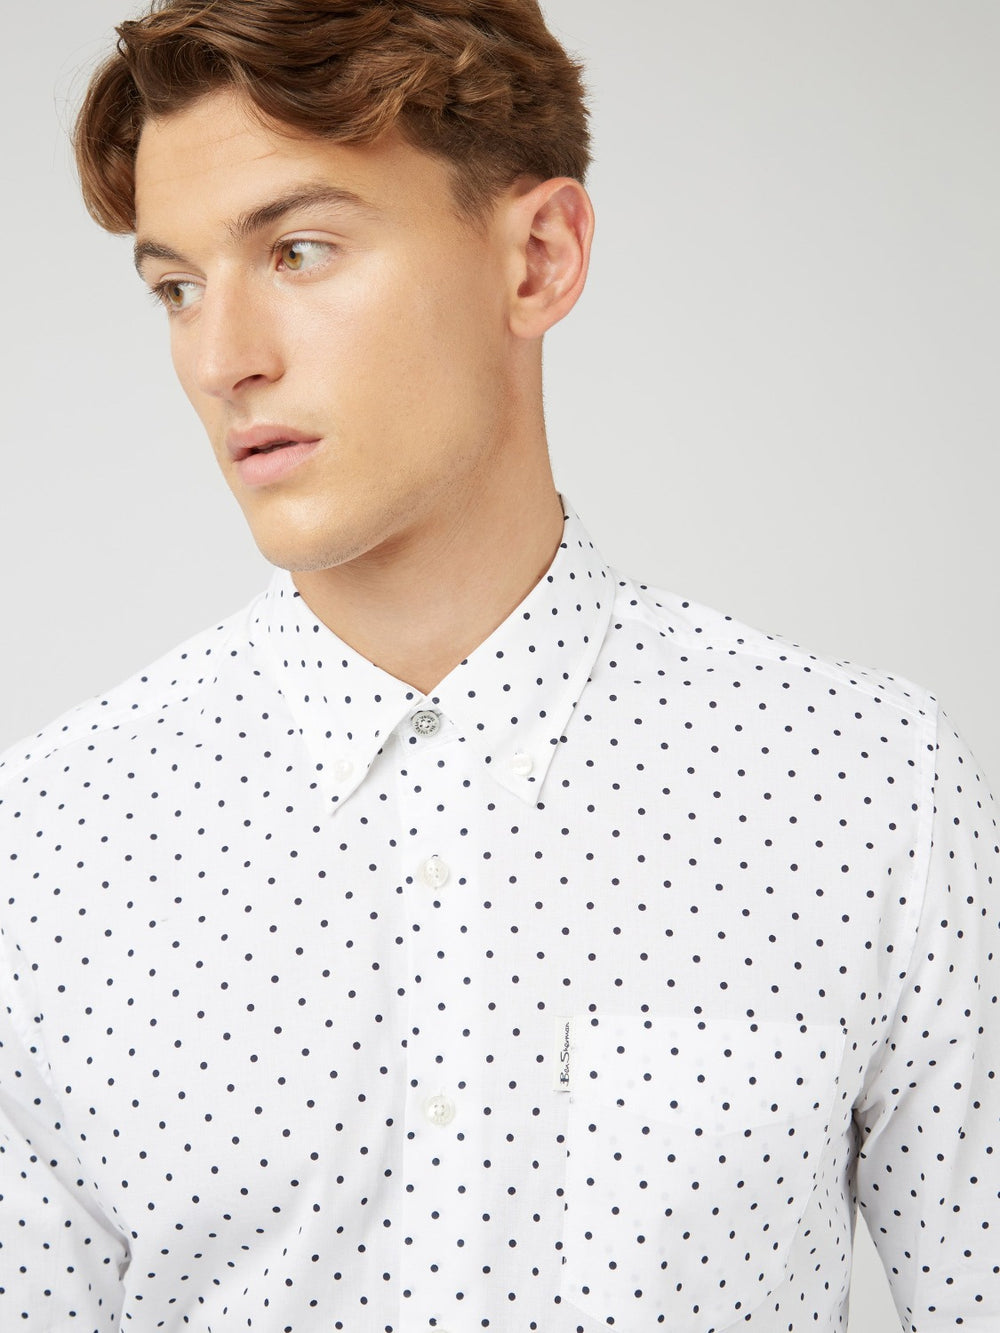 Vintage Men's Polka Dot Long Sleeve Button Down Shirts Party Work Blouse  Tee Top